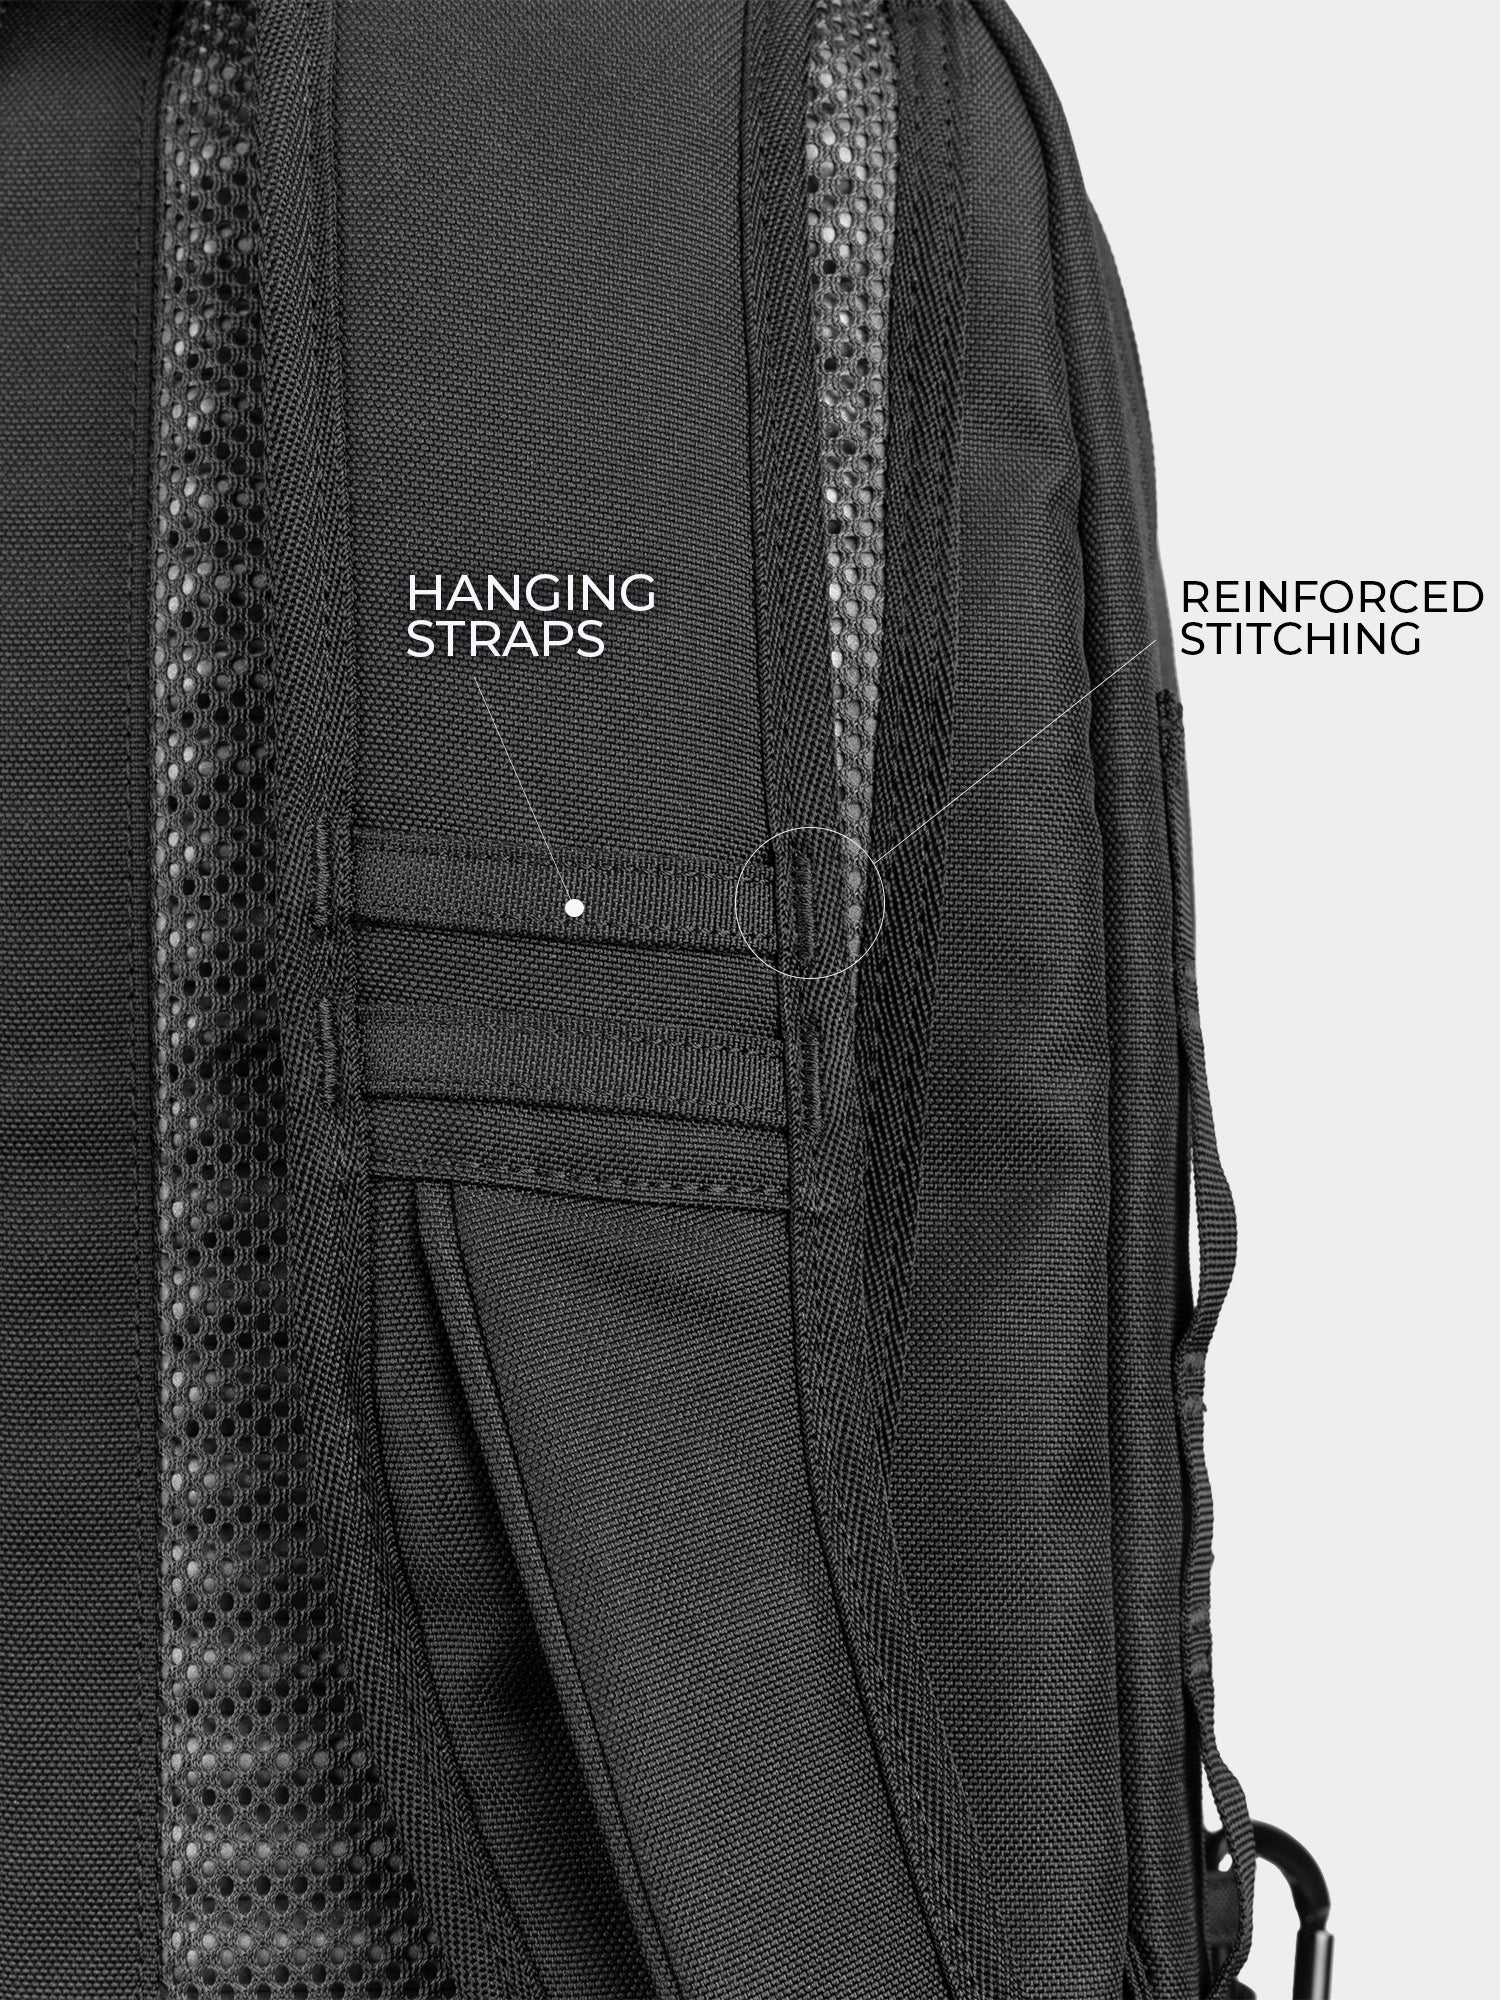 Luxe Backpack – Linus Tech Tips Store